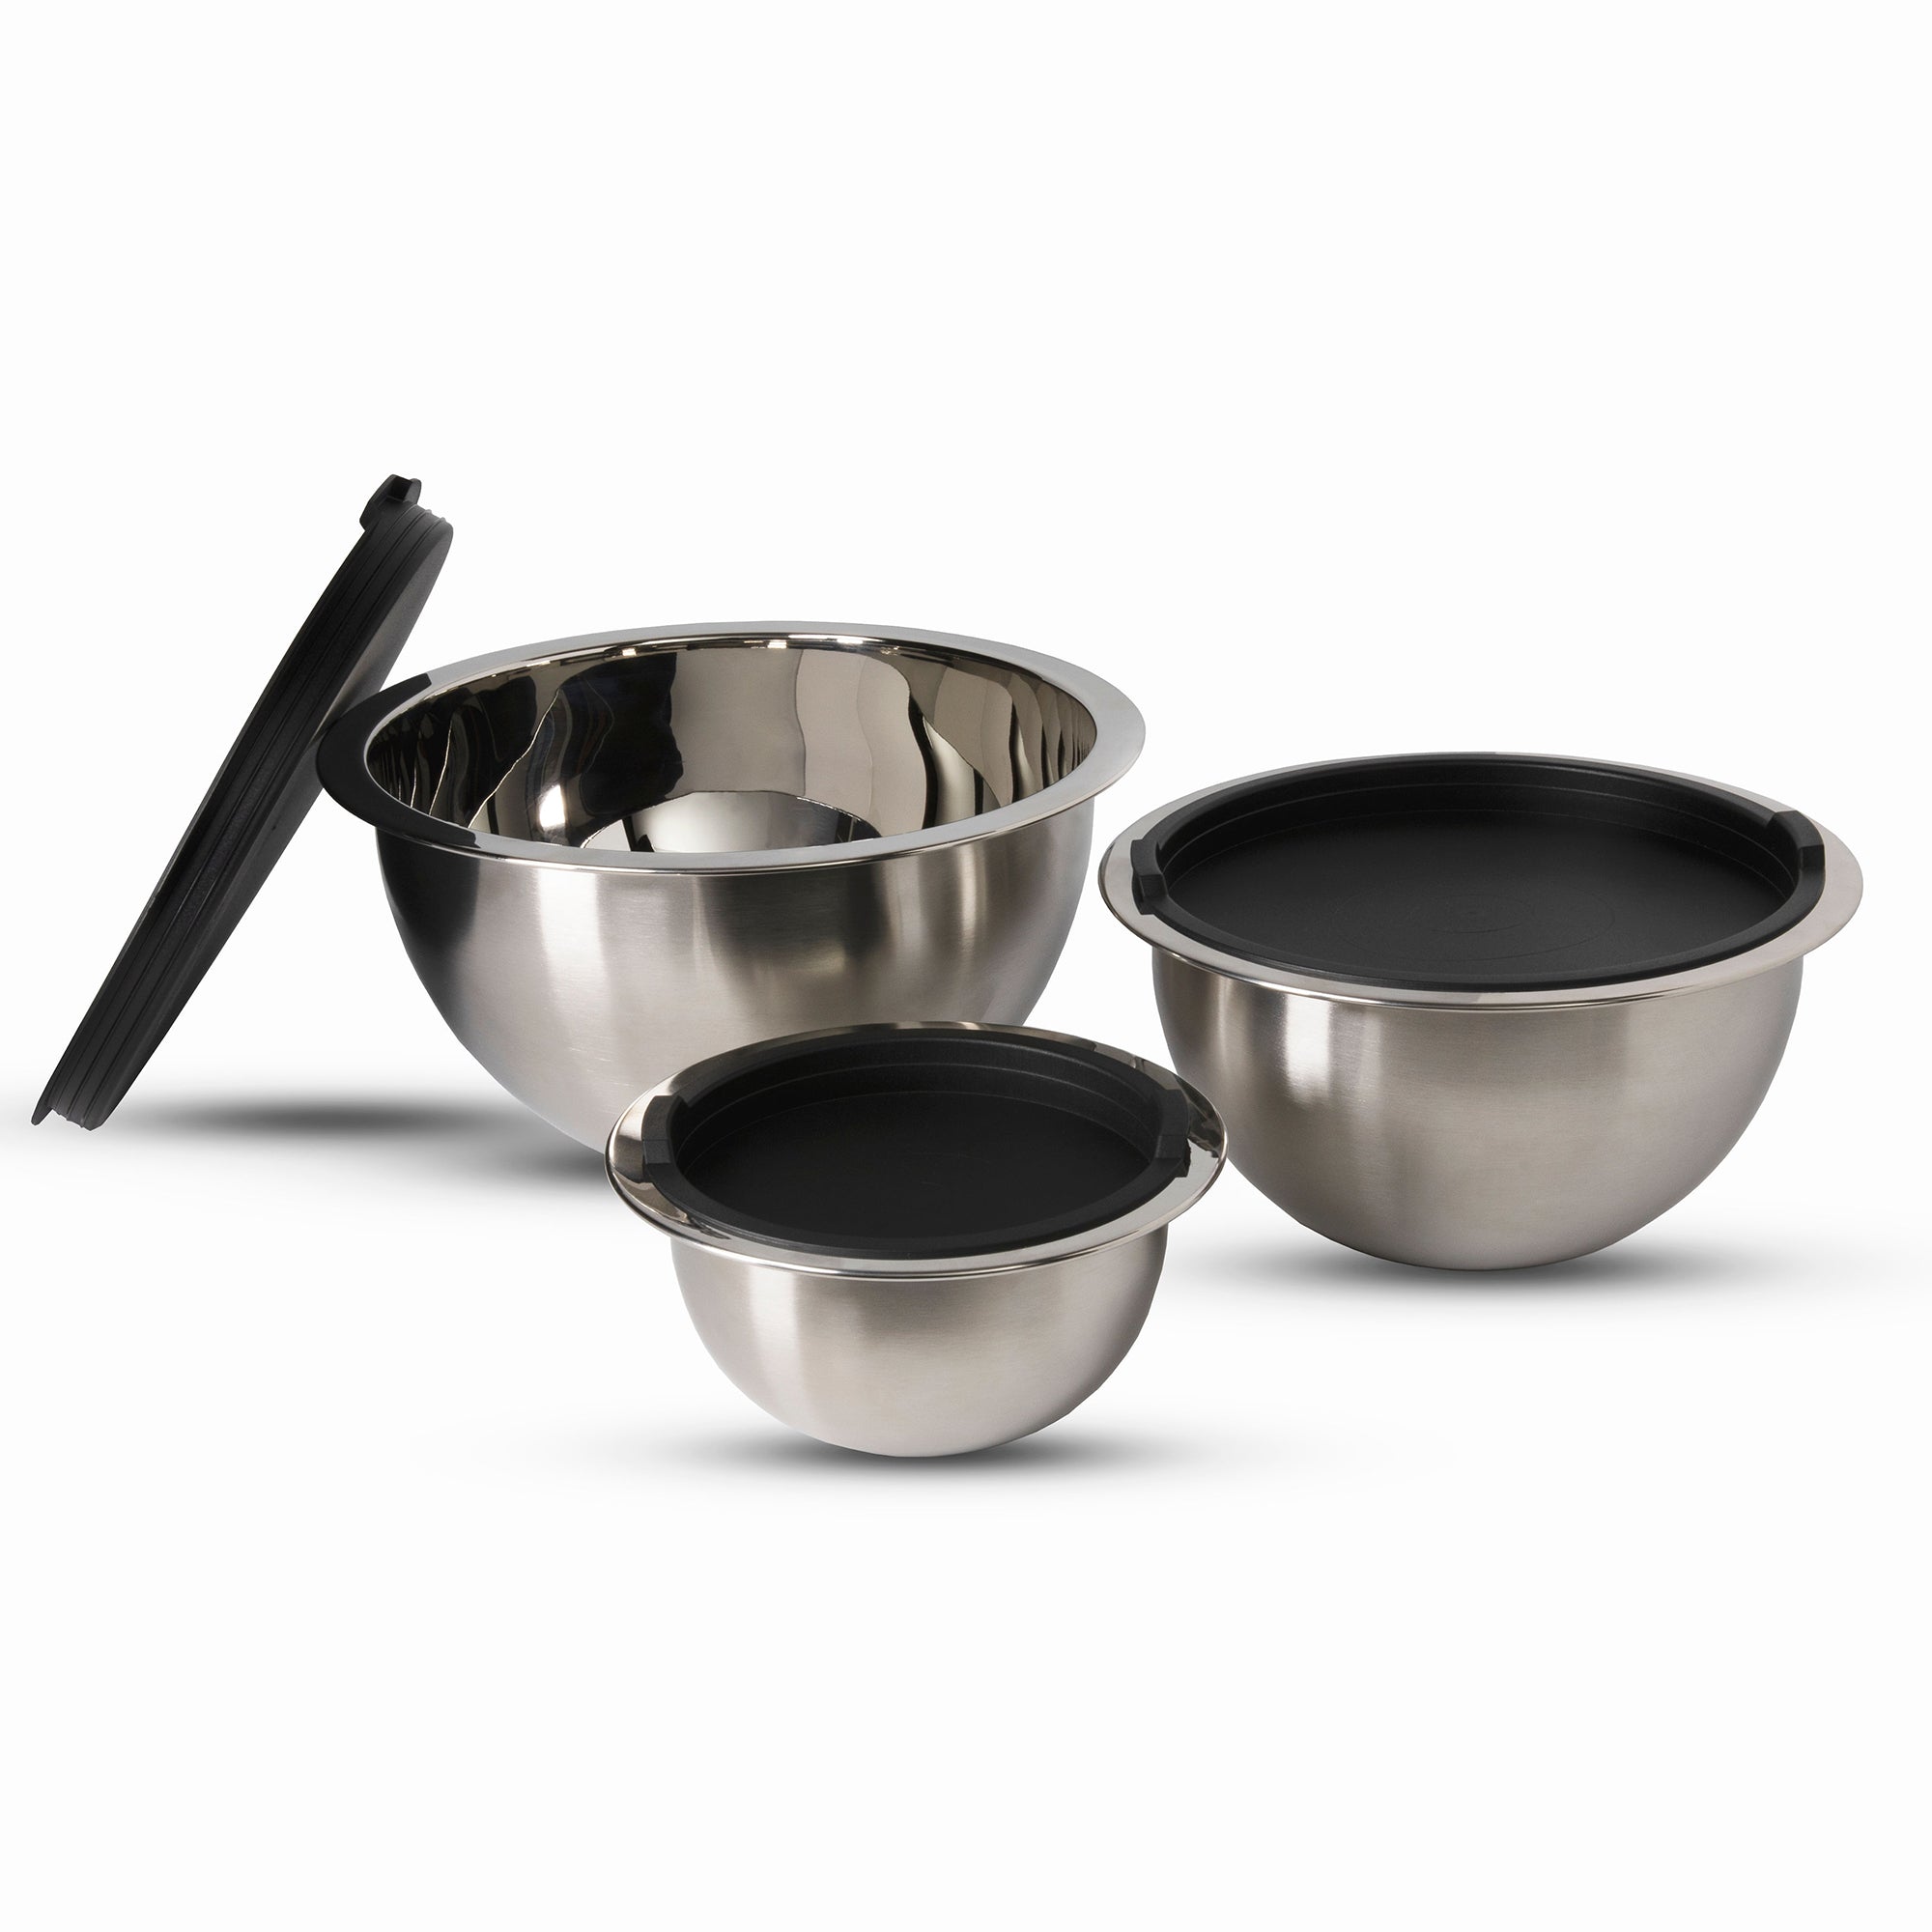 7 Piece Mixing Bowls with Lids for Kitchen, Stainless Steel Mixing Bow